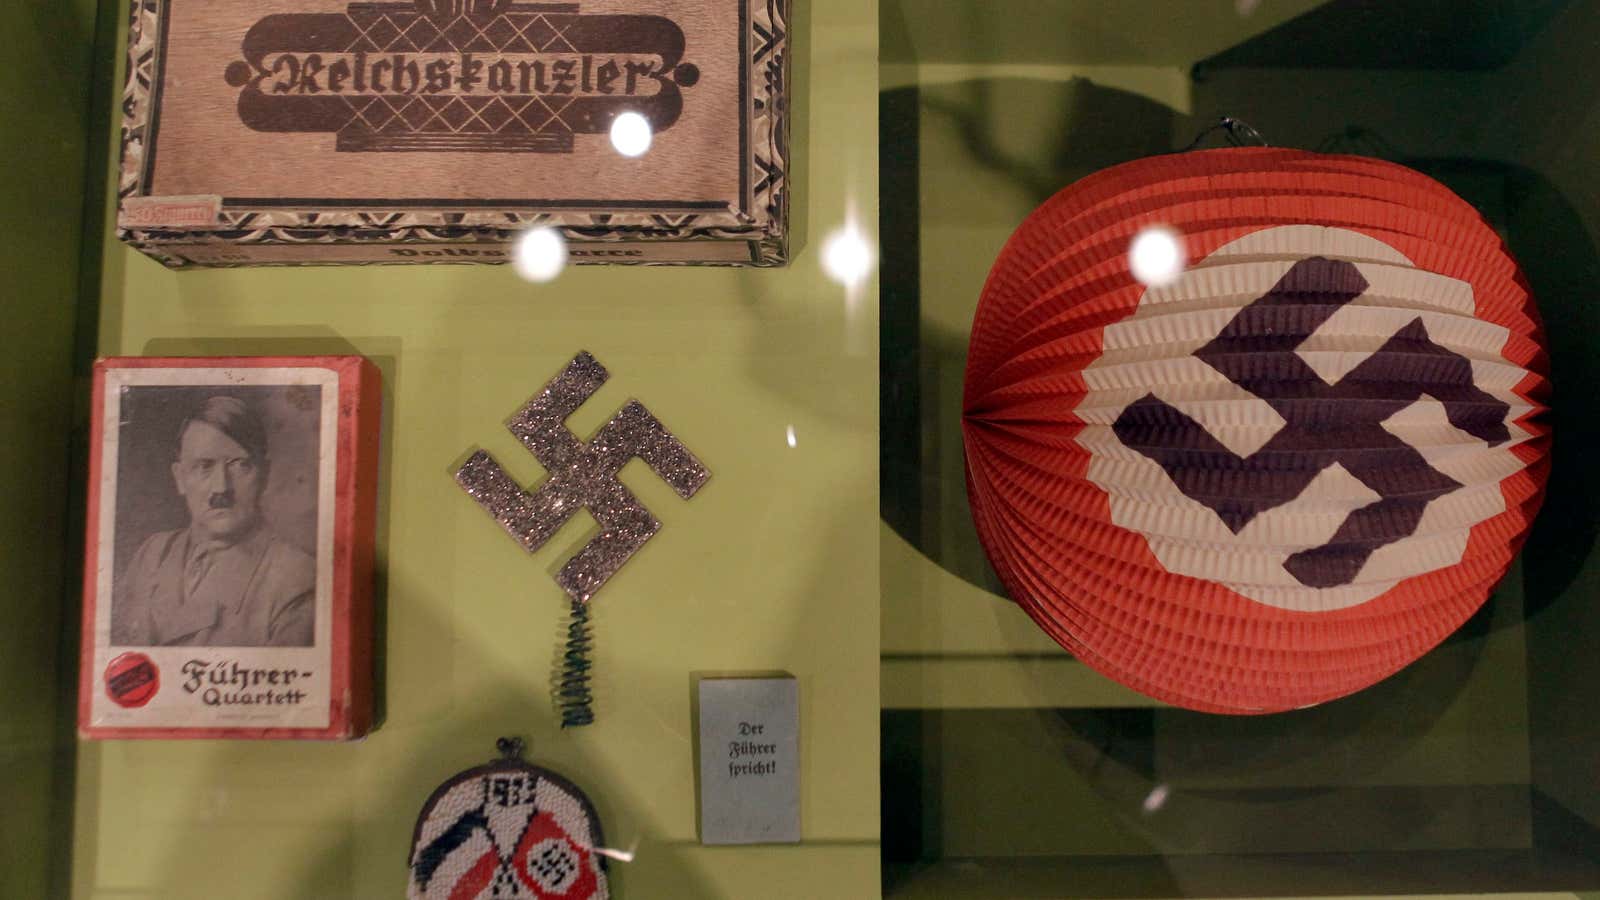 French free speech laws, which prohibit the sale or display of Nazi paraphernalia, are a challenge for Twitter.